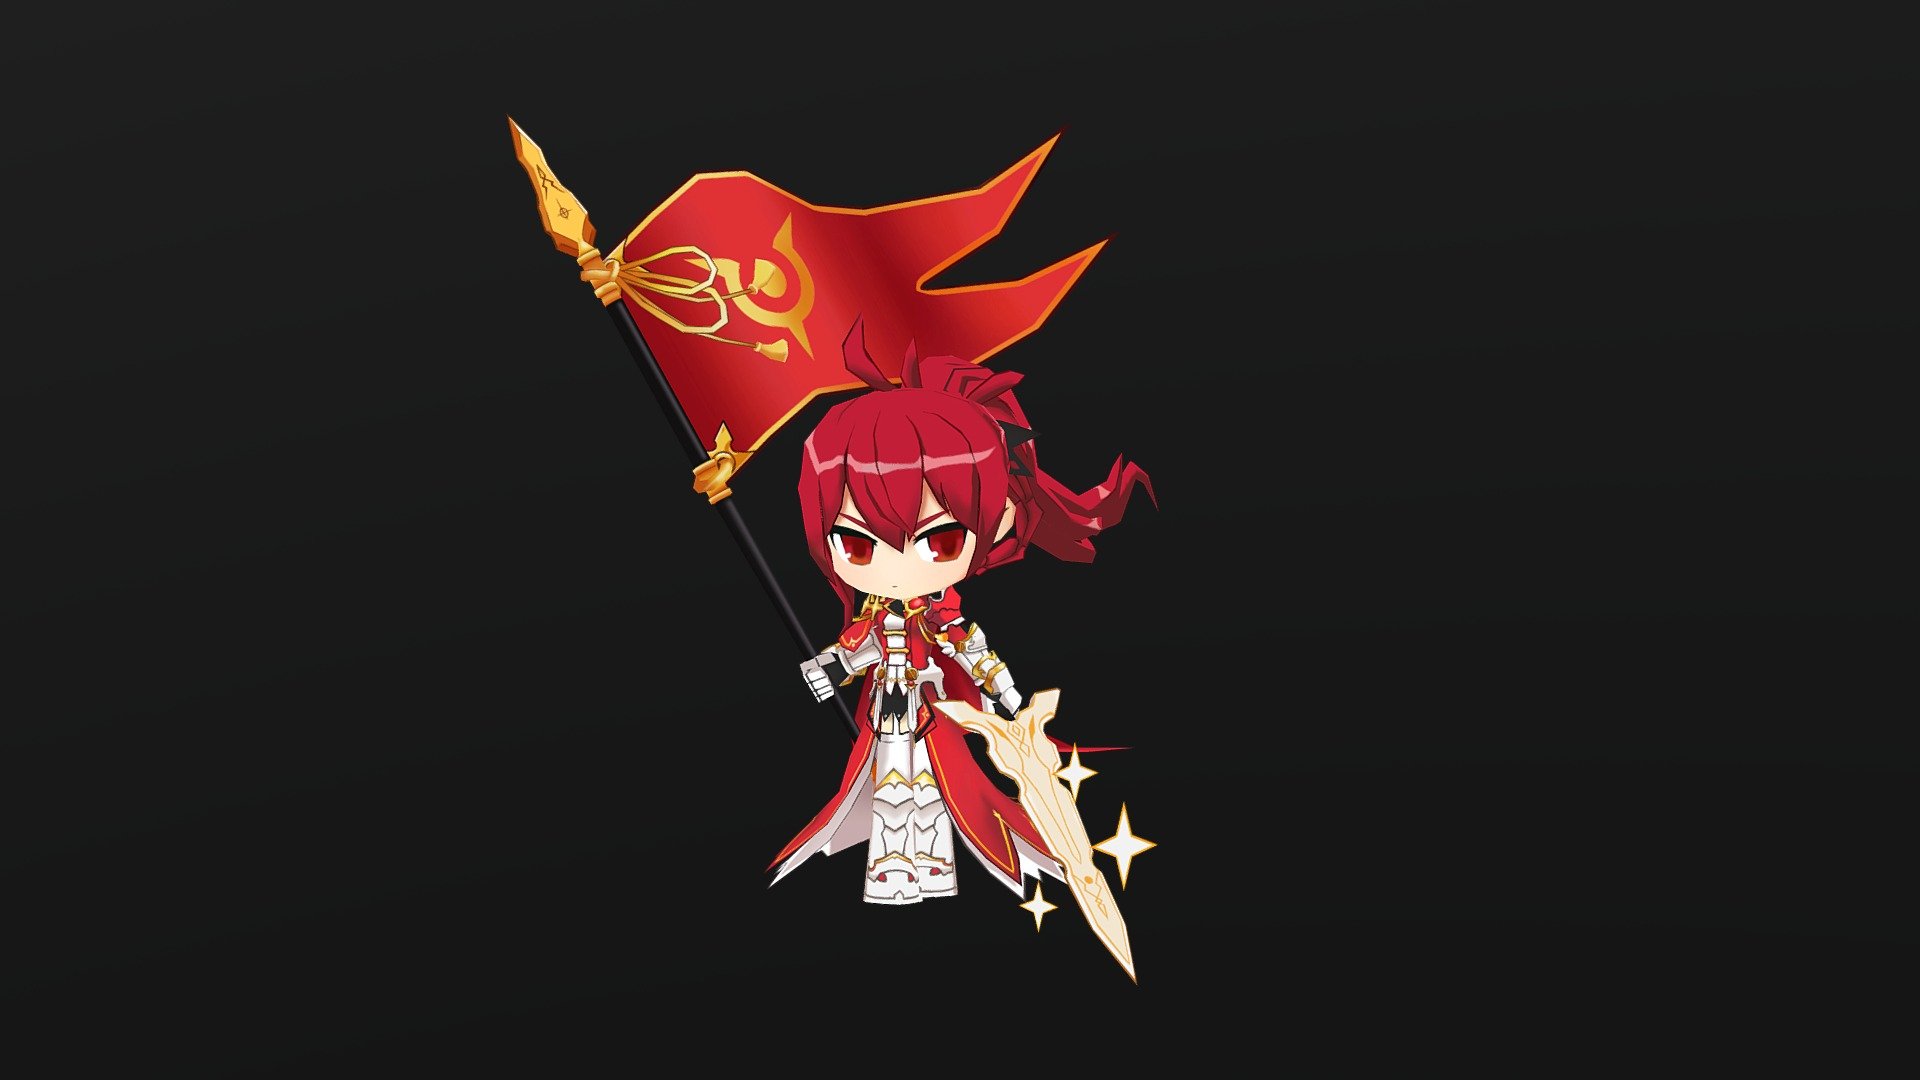 Elsword The Red Knight, Elesis